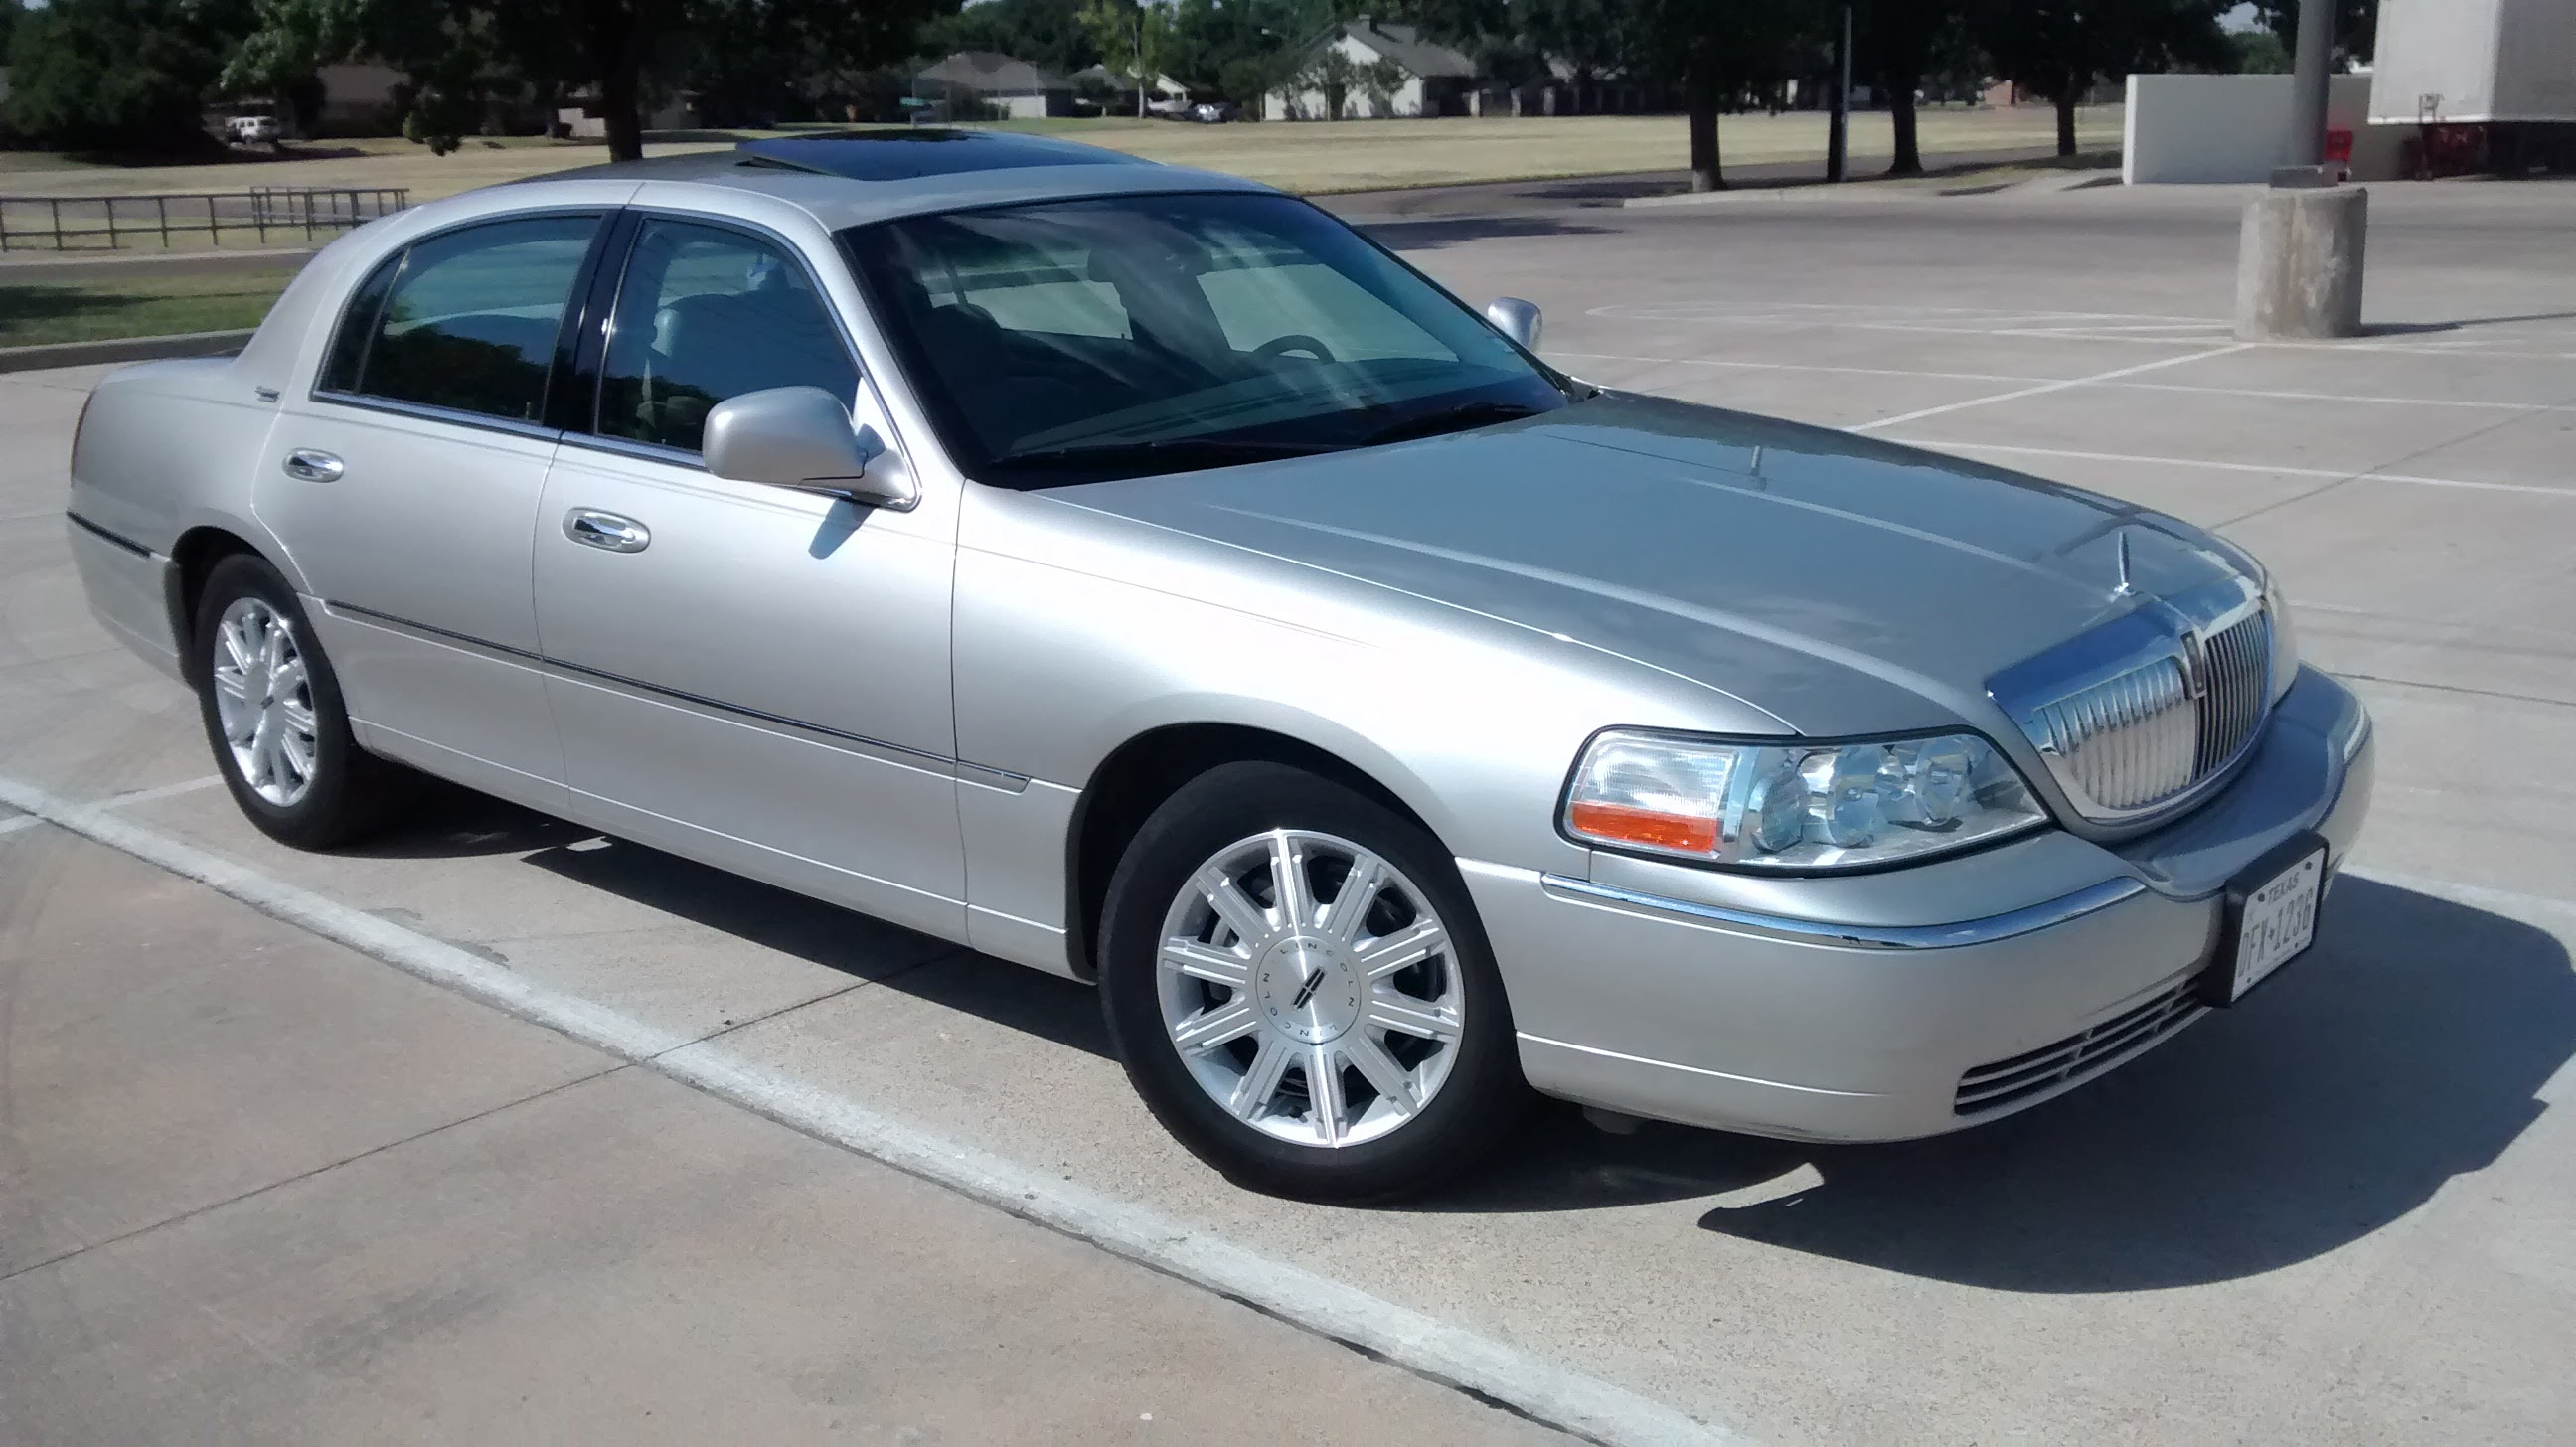 File:2006 Lincoln Town Car Signature Limited.jpg - Wikimedia Commons